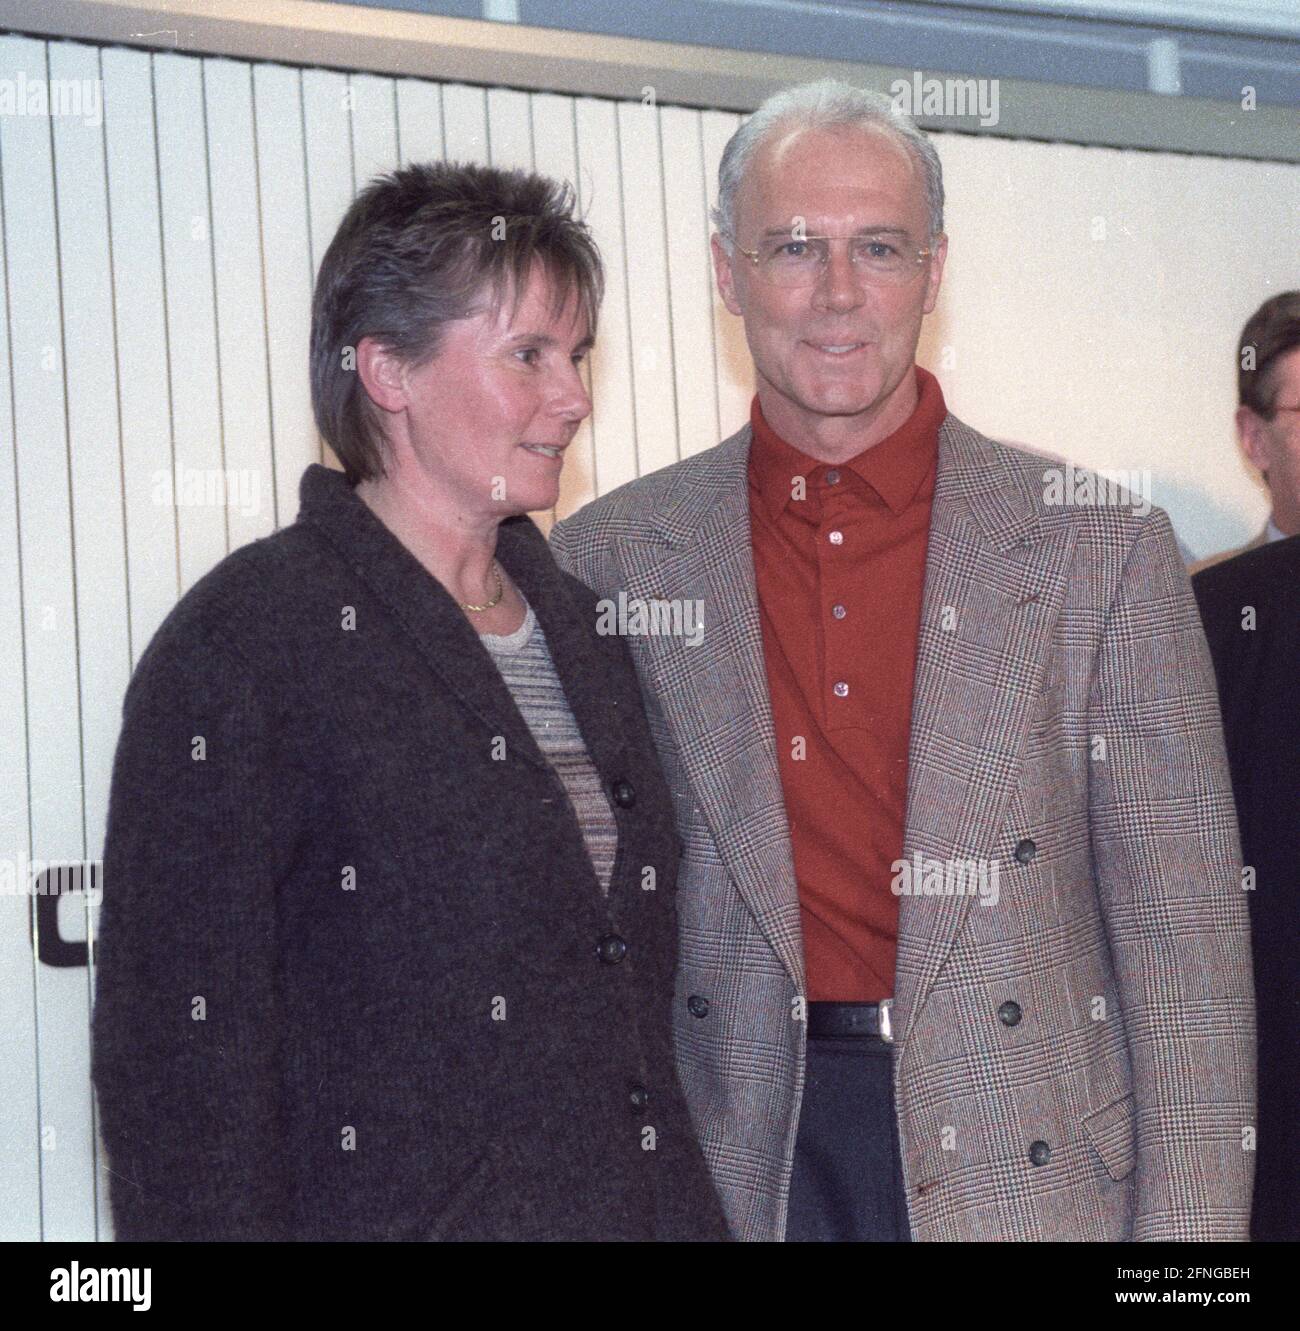 DFB press conference women's football 06.03.1999. Franz Beckenbauer and Tina Theune-Meyer. [automated translation] Stock Photo